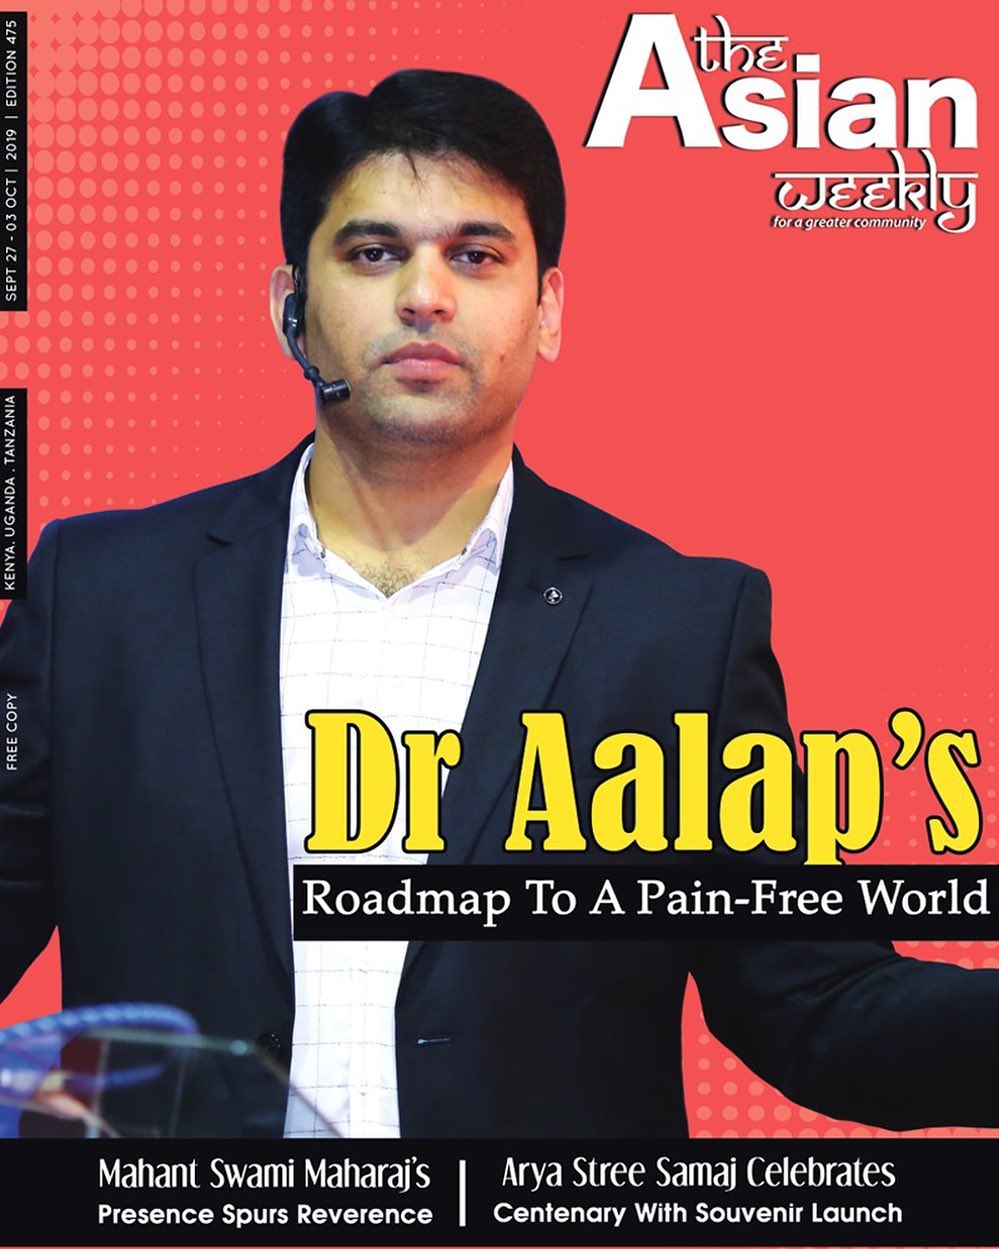 An honor so precious, an honor so humbling! It’s a matter of immense pride for us as our founder Dr. Aalap Shah is featured on the cover story of a leading magazine of Kenya, “The Asian Weekly” on a roadmap to a pain-free world! 
We deeply appreciate the recognition & the love extended by everyone at Kenya & the team of 